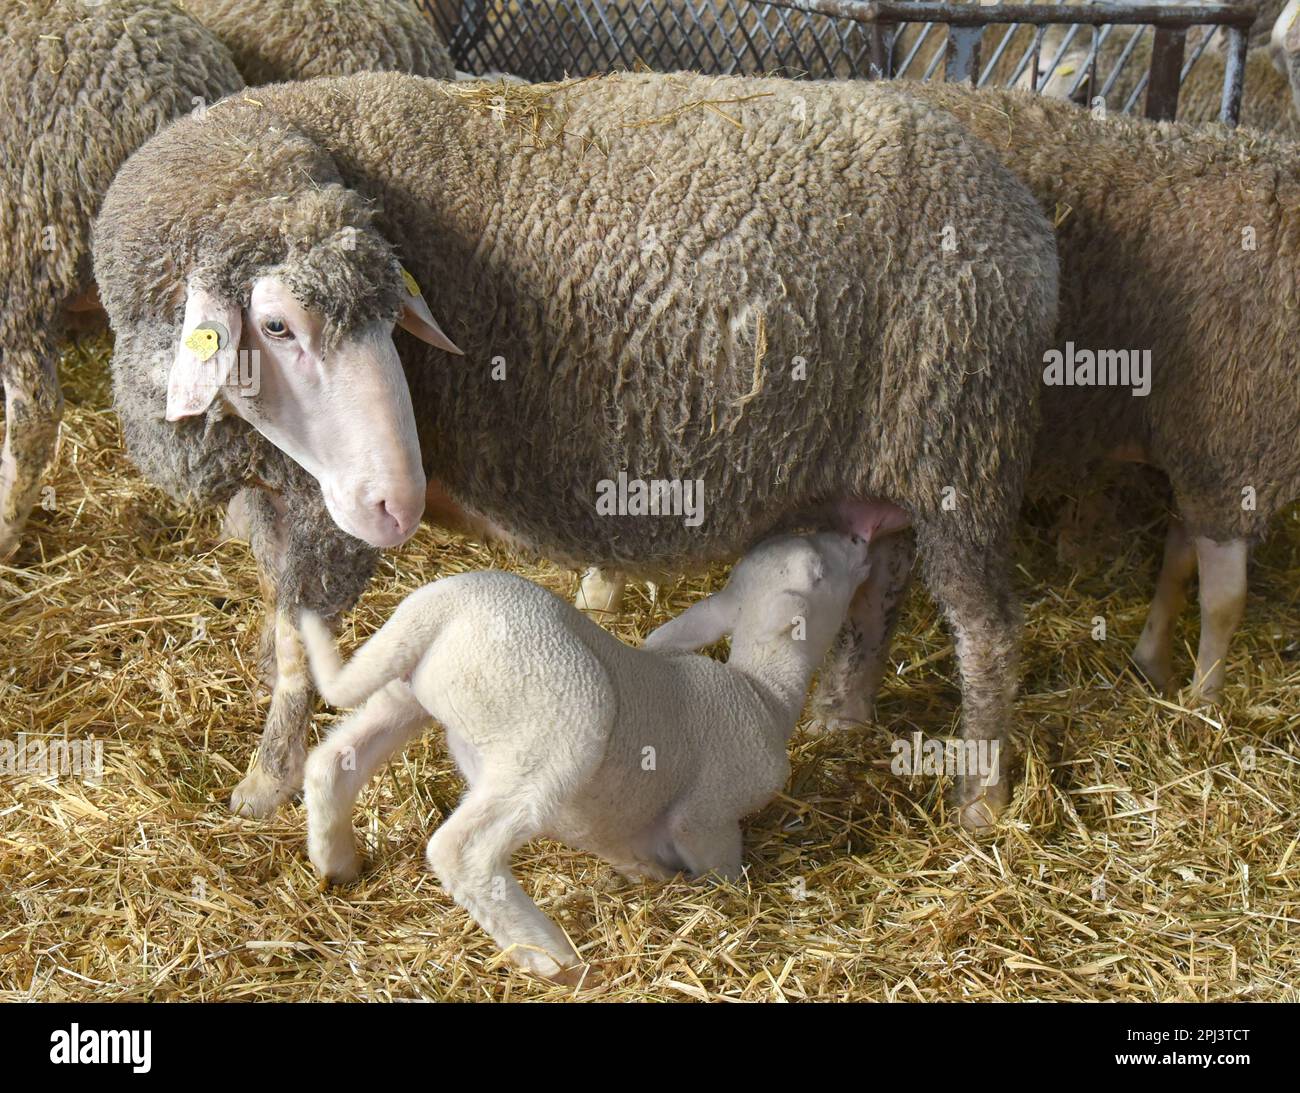 28 March 2023, Saxony, Polenz/Machern: In a sheep pen in Polenz at Landwirtschafts GmbH Machern near Leipzig (Saxony), a four-week-old little lamb drinks from its mother. The animals are currently being looked after by shepherdess trainee Clara and master shepherd Dietmar Walter. Didiee 20-year-old Clara, who plans to complete her two-year apprenticeship as a shepherdess in the summer and then study agricultural science, receives valuable support from master shepherd Siegmar Walter, who has been working as a shepherd for 47 years. He and apprentice Clara currently look after 1,000 ewes and 700 Stock Photo